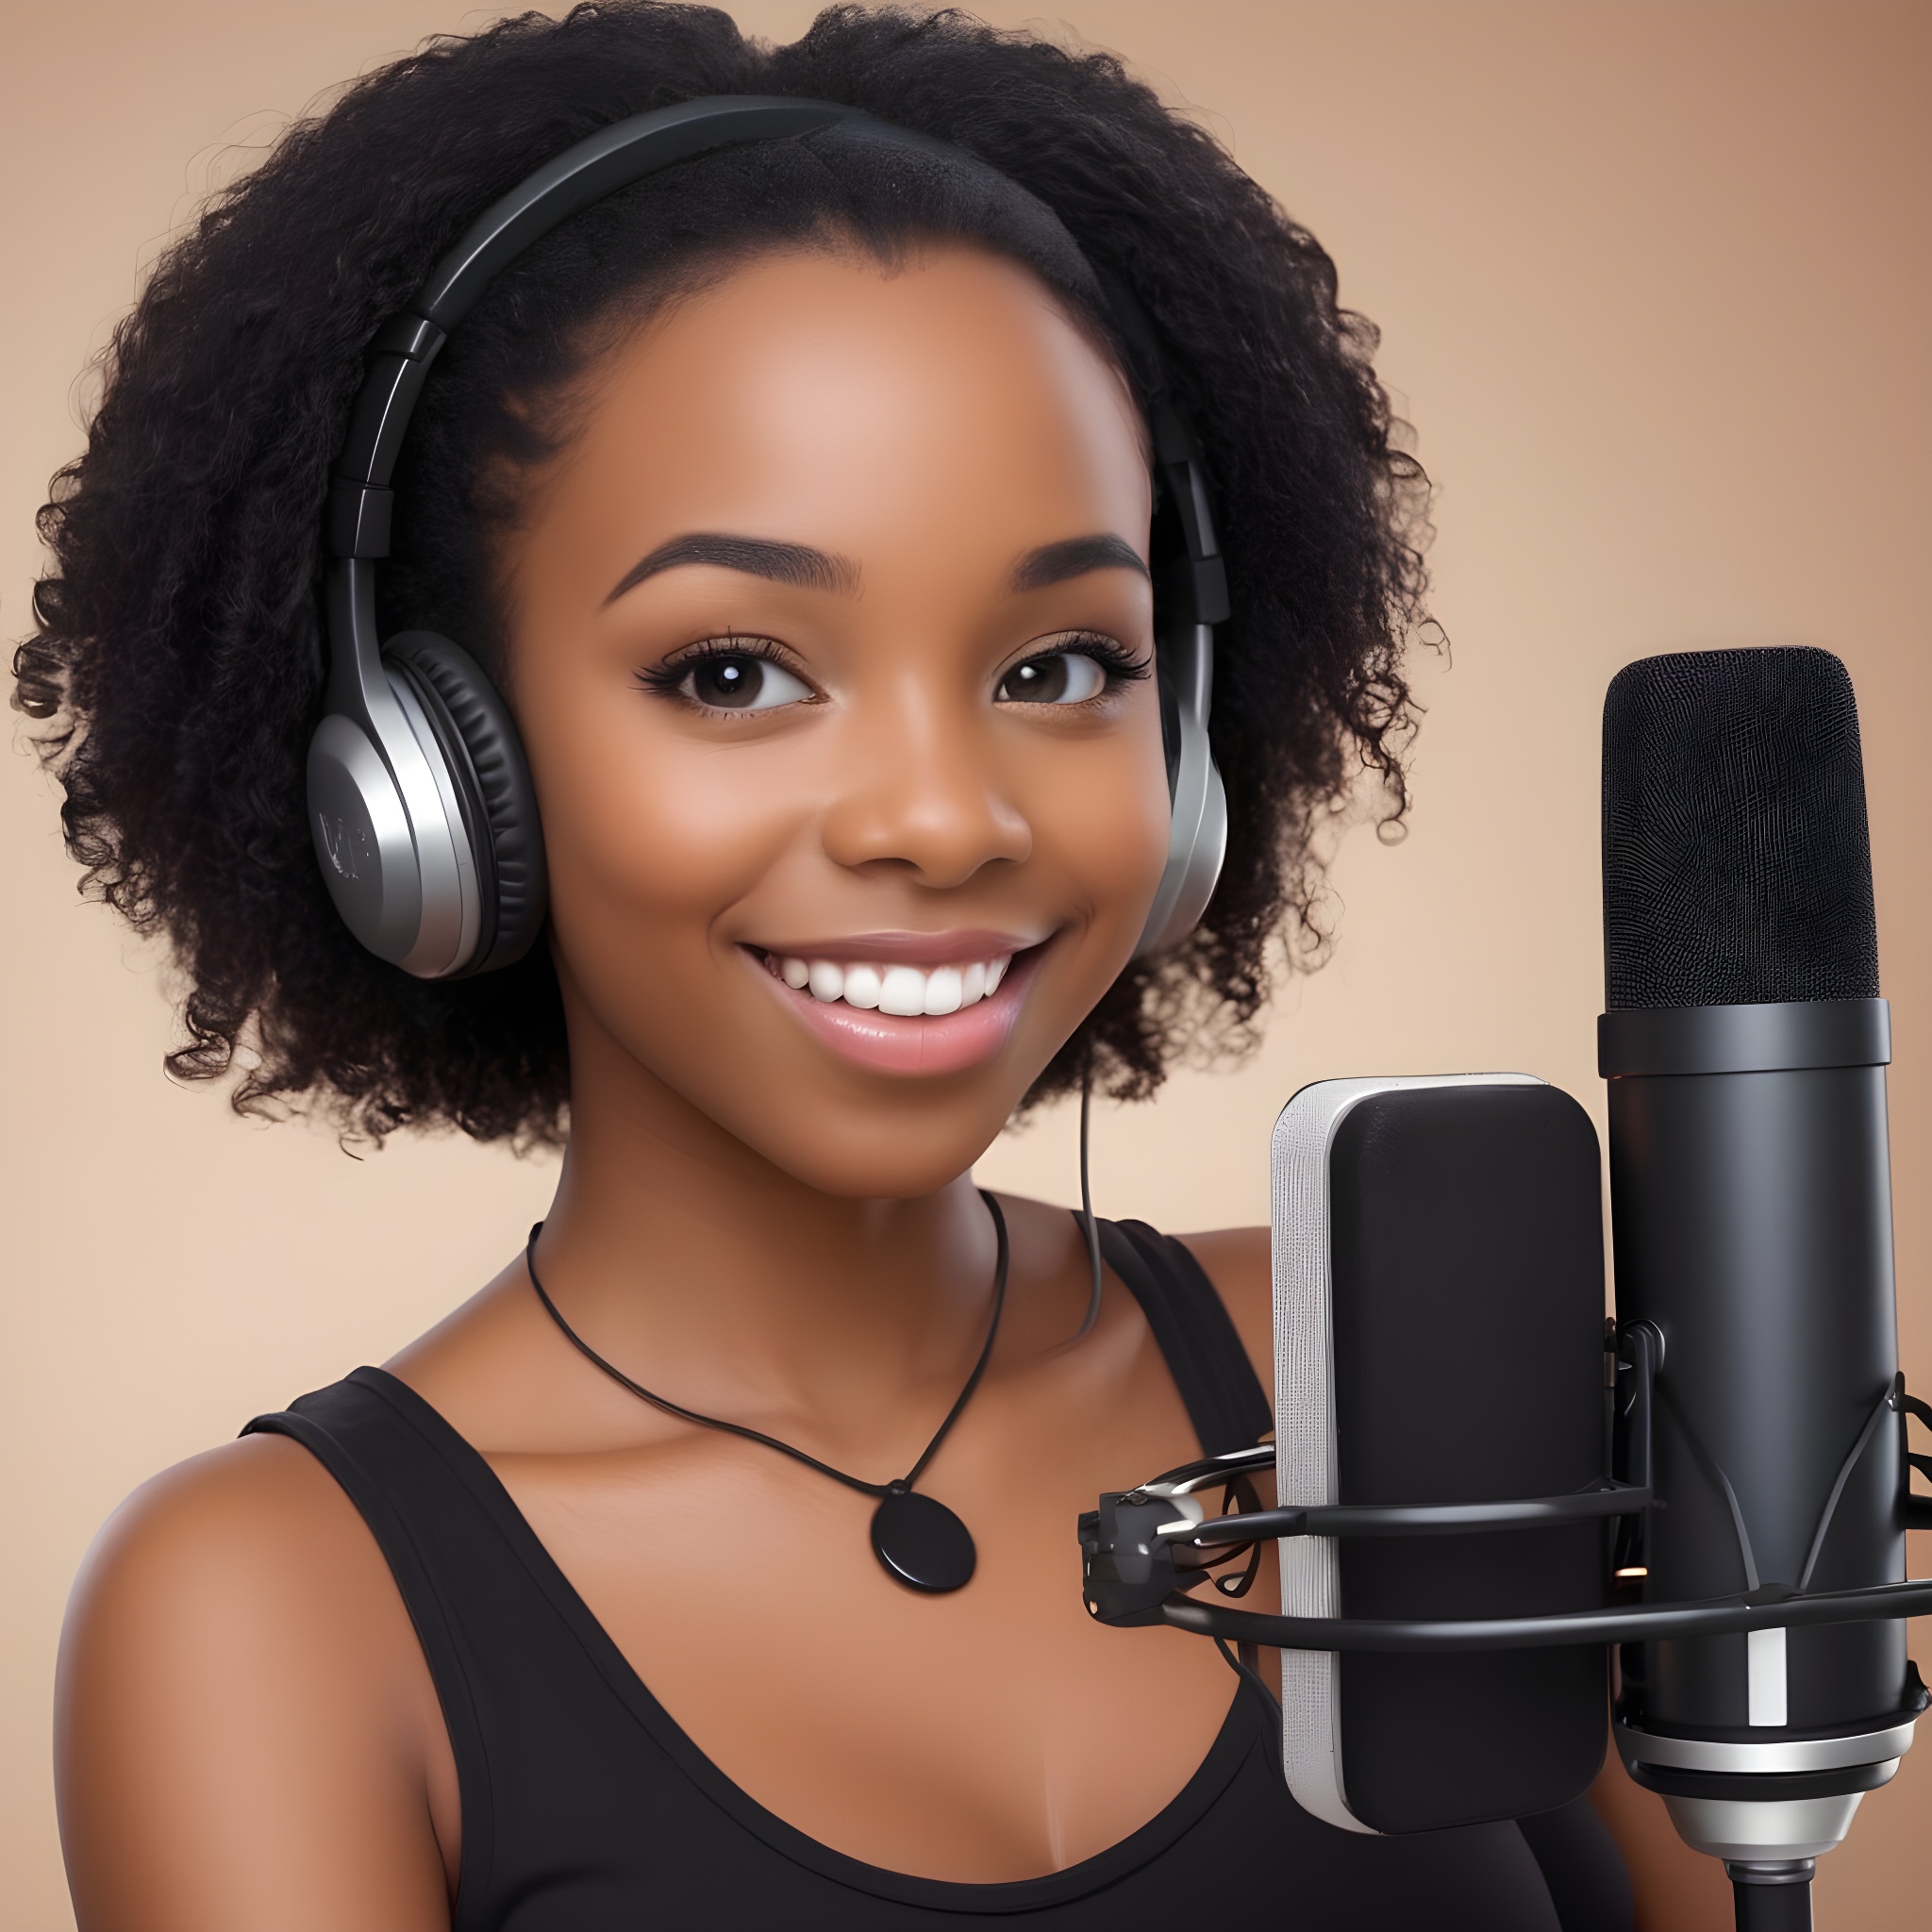 The Crucial Role of Voice Over Artists in Advertising: A Focus on Kenya